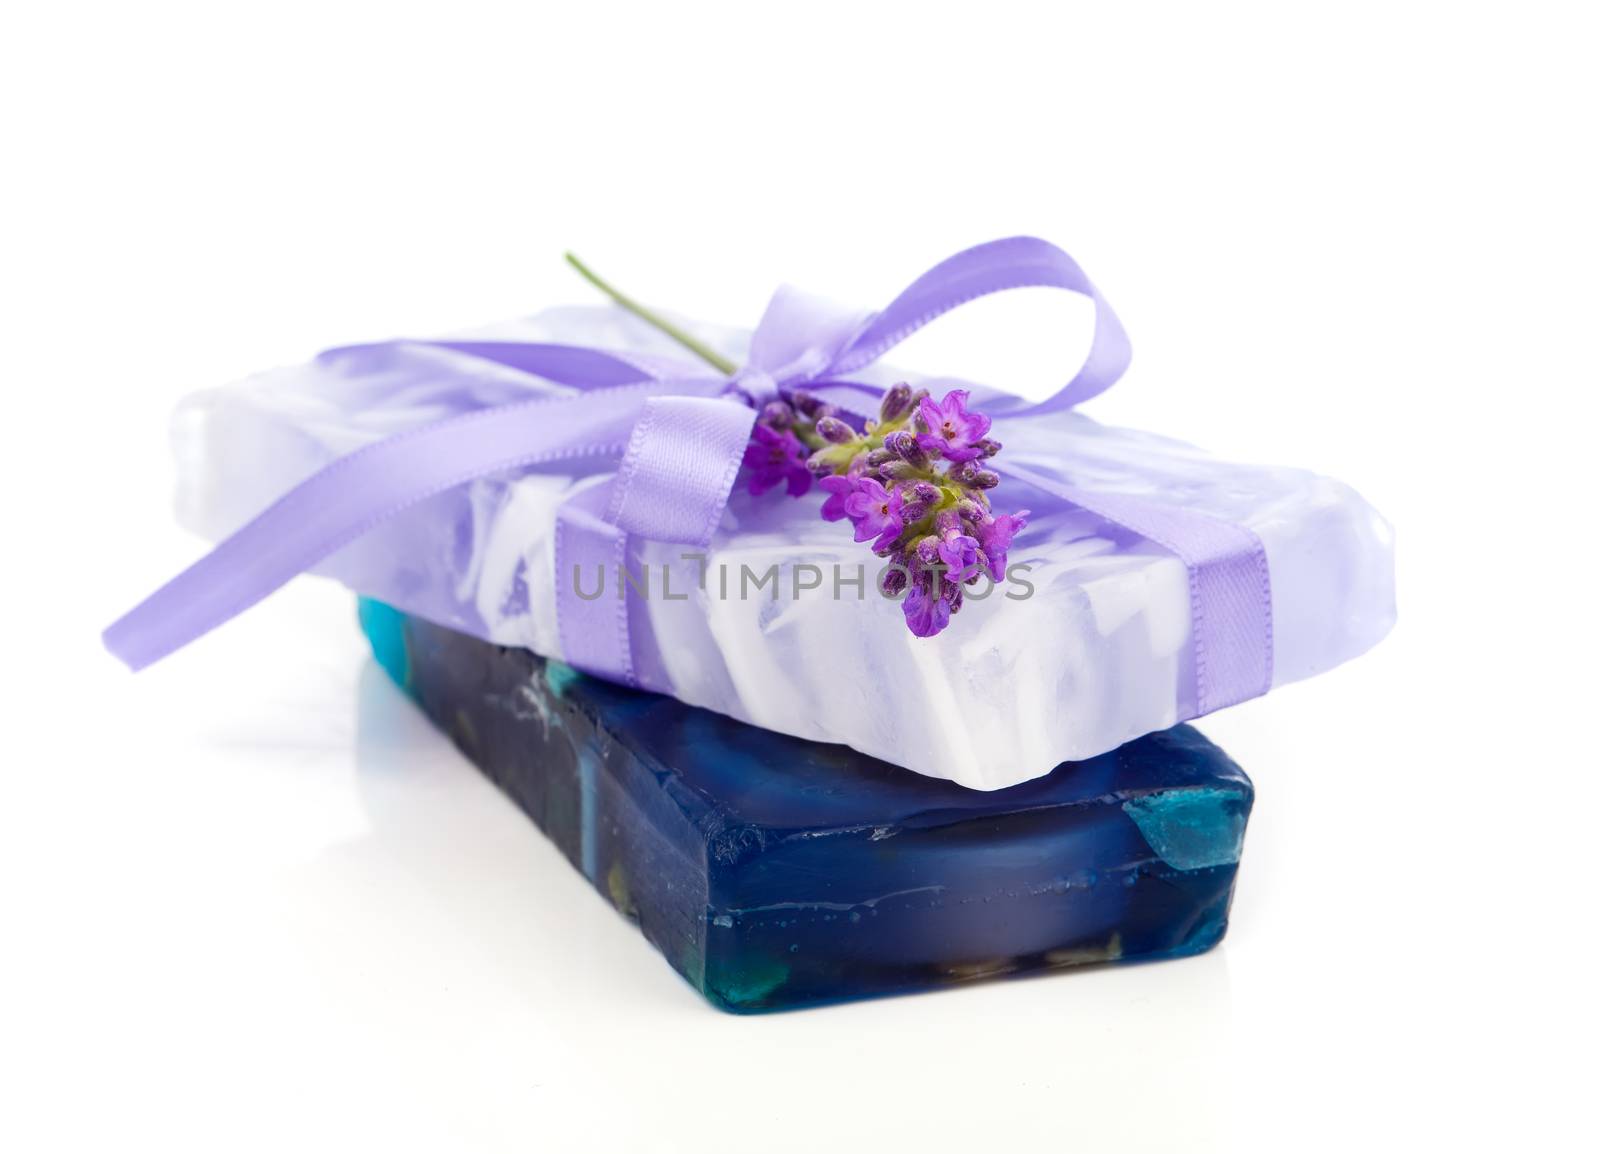 natural herbal lavender soap with fresh blossoms isolated on white background